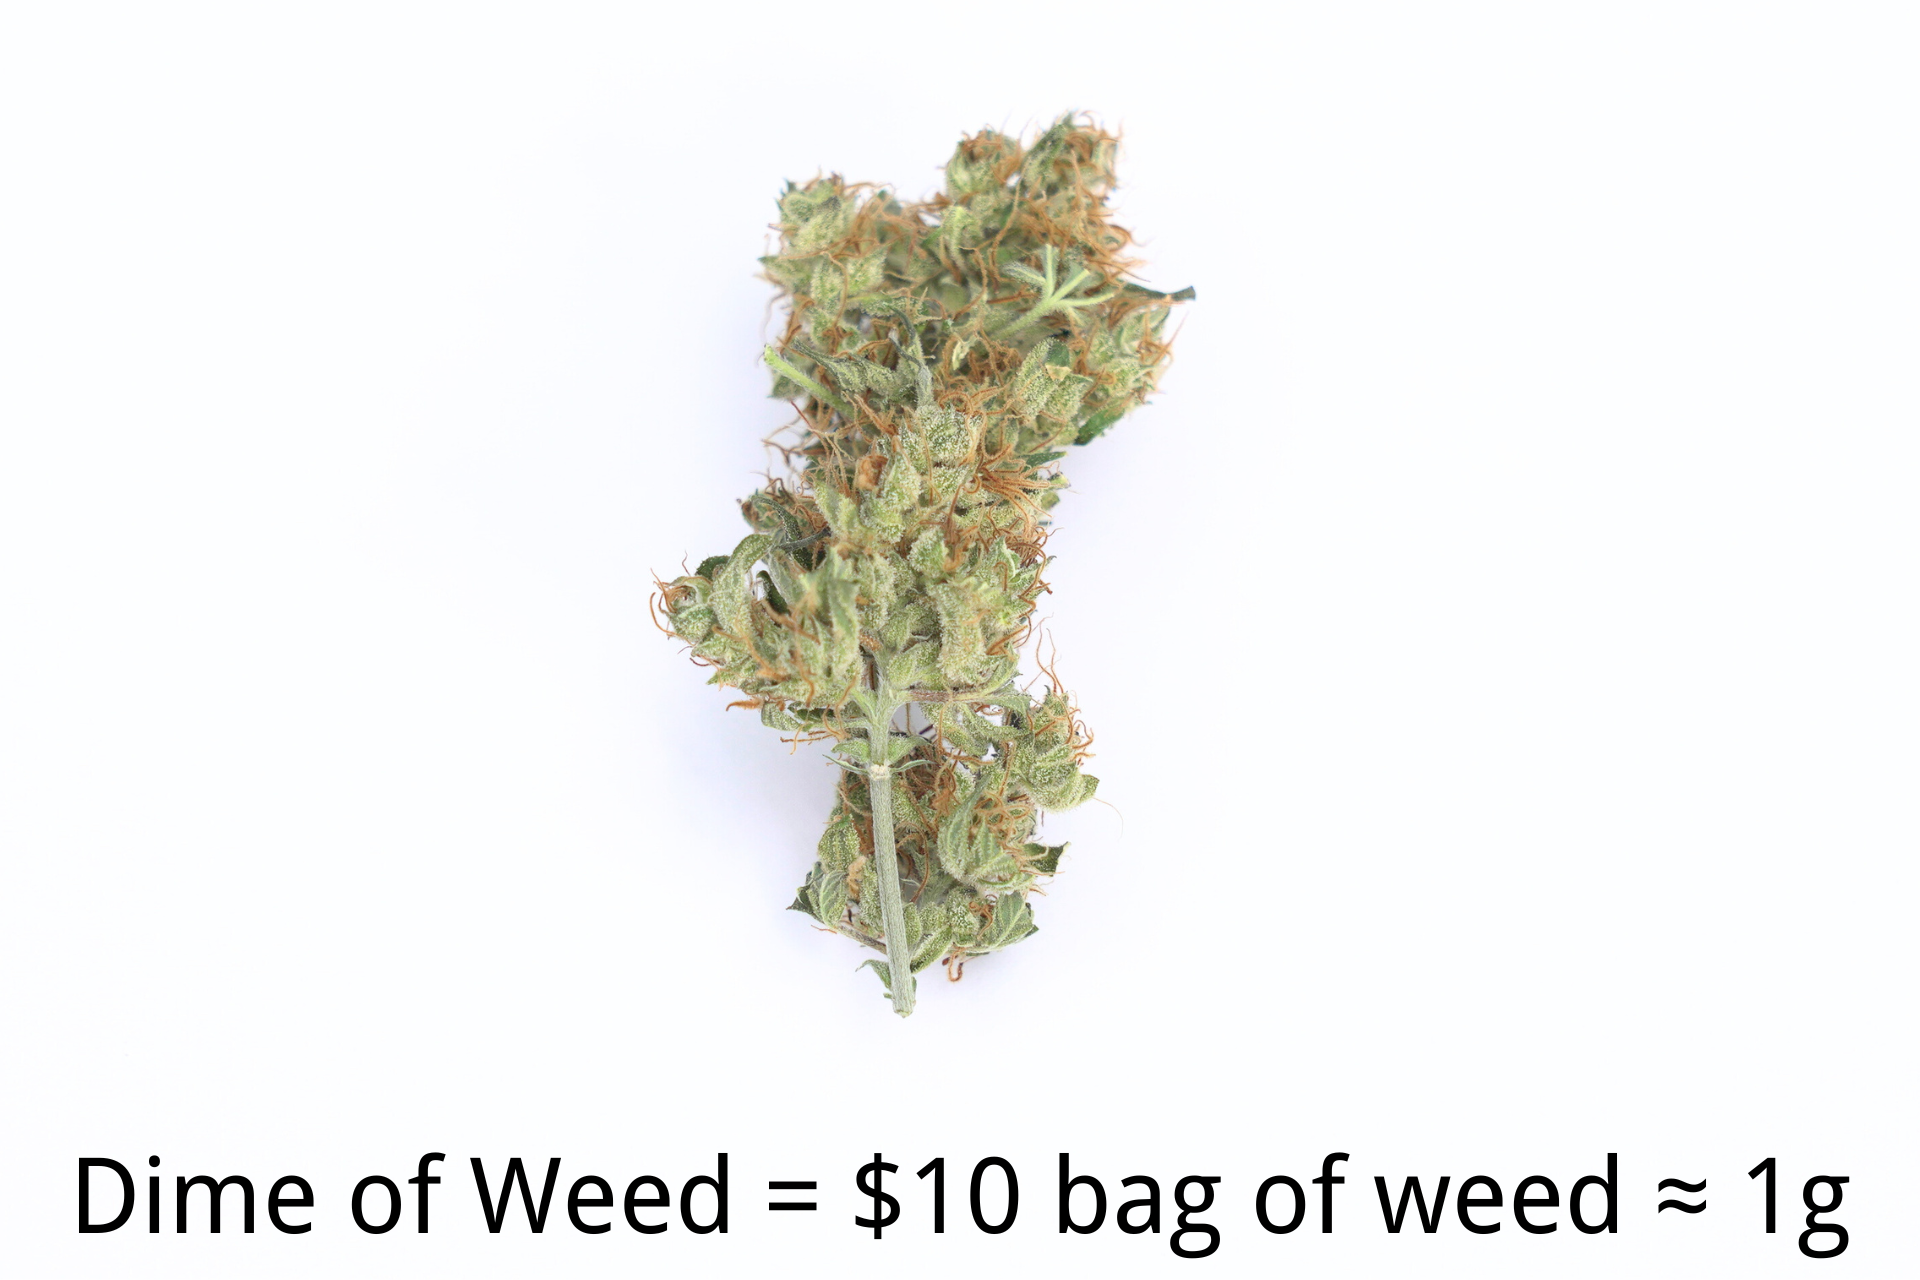 Explication of Dime of weed